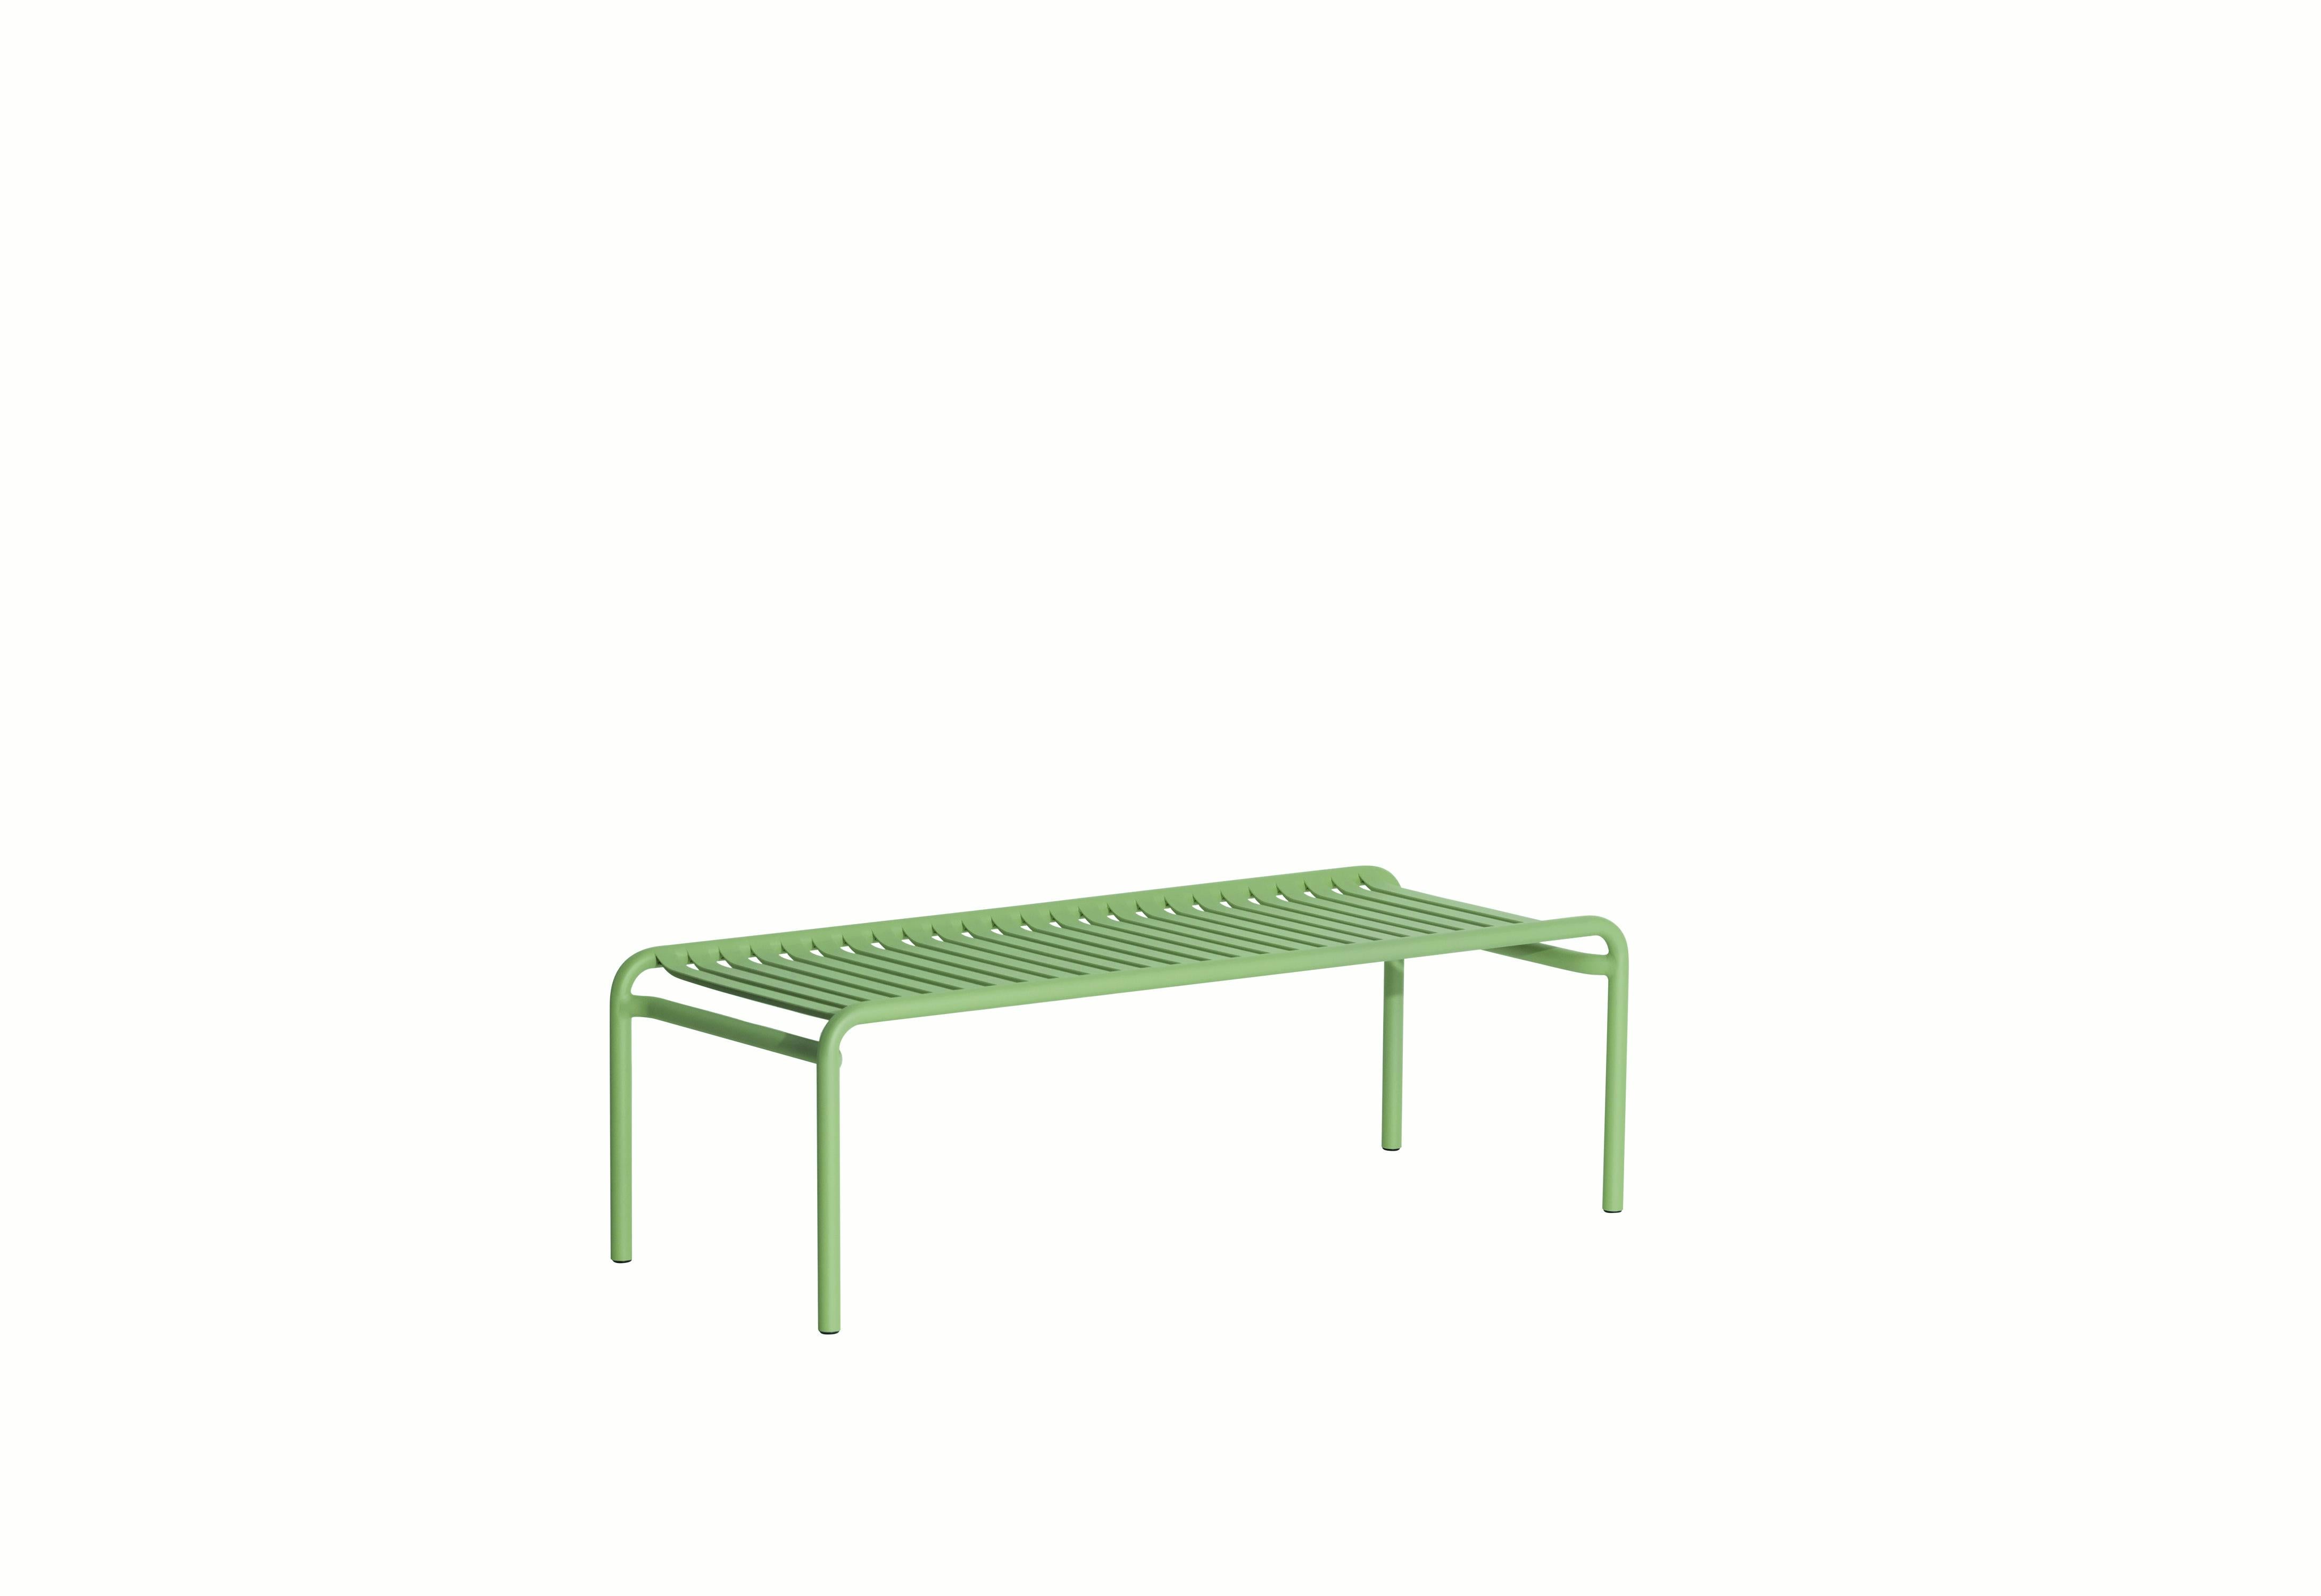 Petite Friture Week-End Long Coffee Table in Jade Green Aluminium by Studio BrichetZiegler, 2017

The week-end collection is a full range of outdoor furniture, in aluminium grained epoxy paint, matt finish, that includes 18 functions and 8 colours